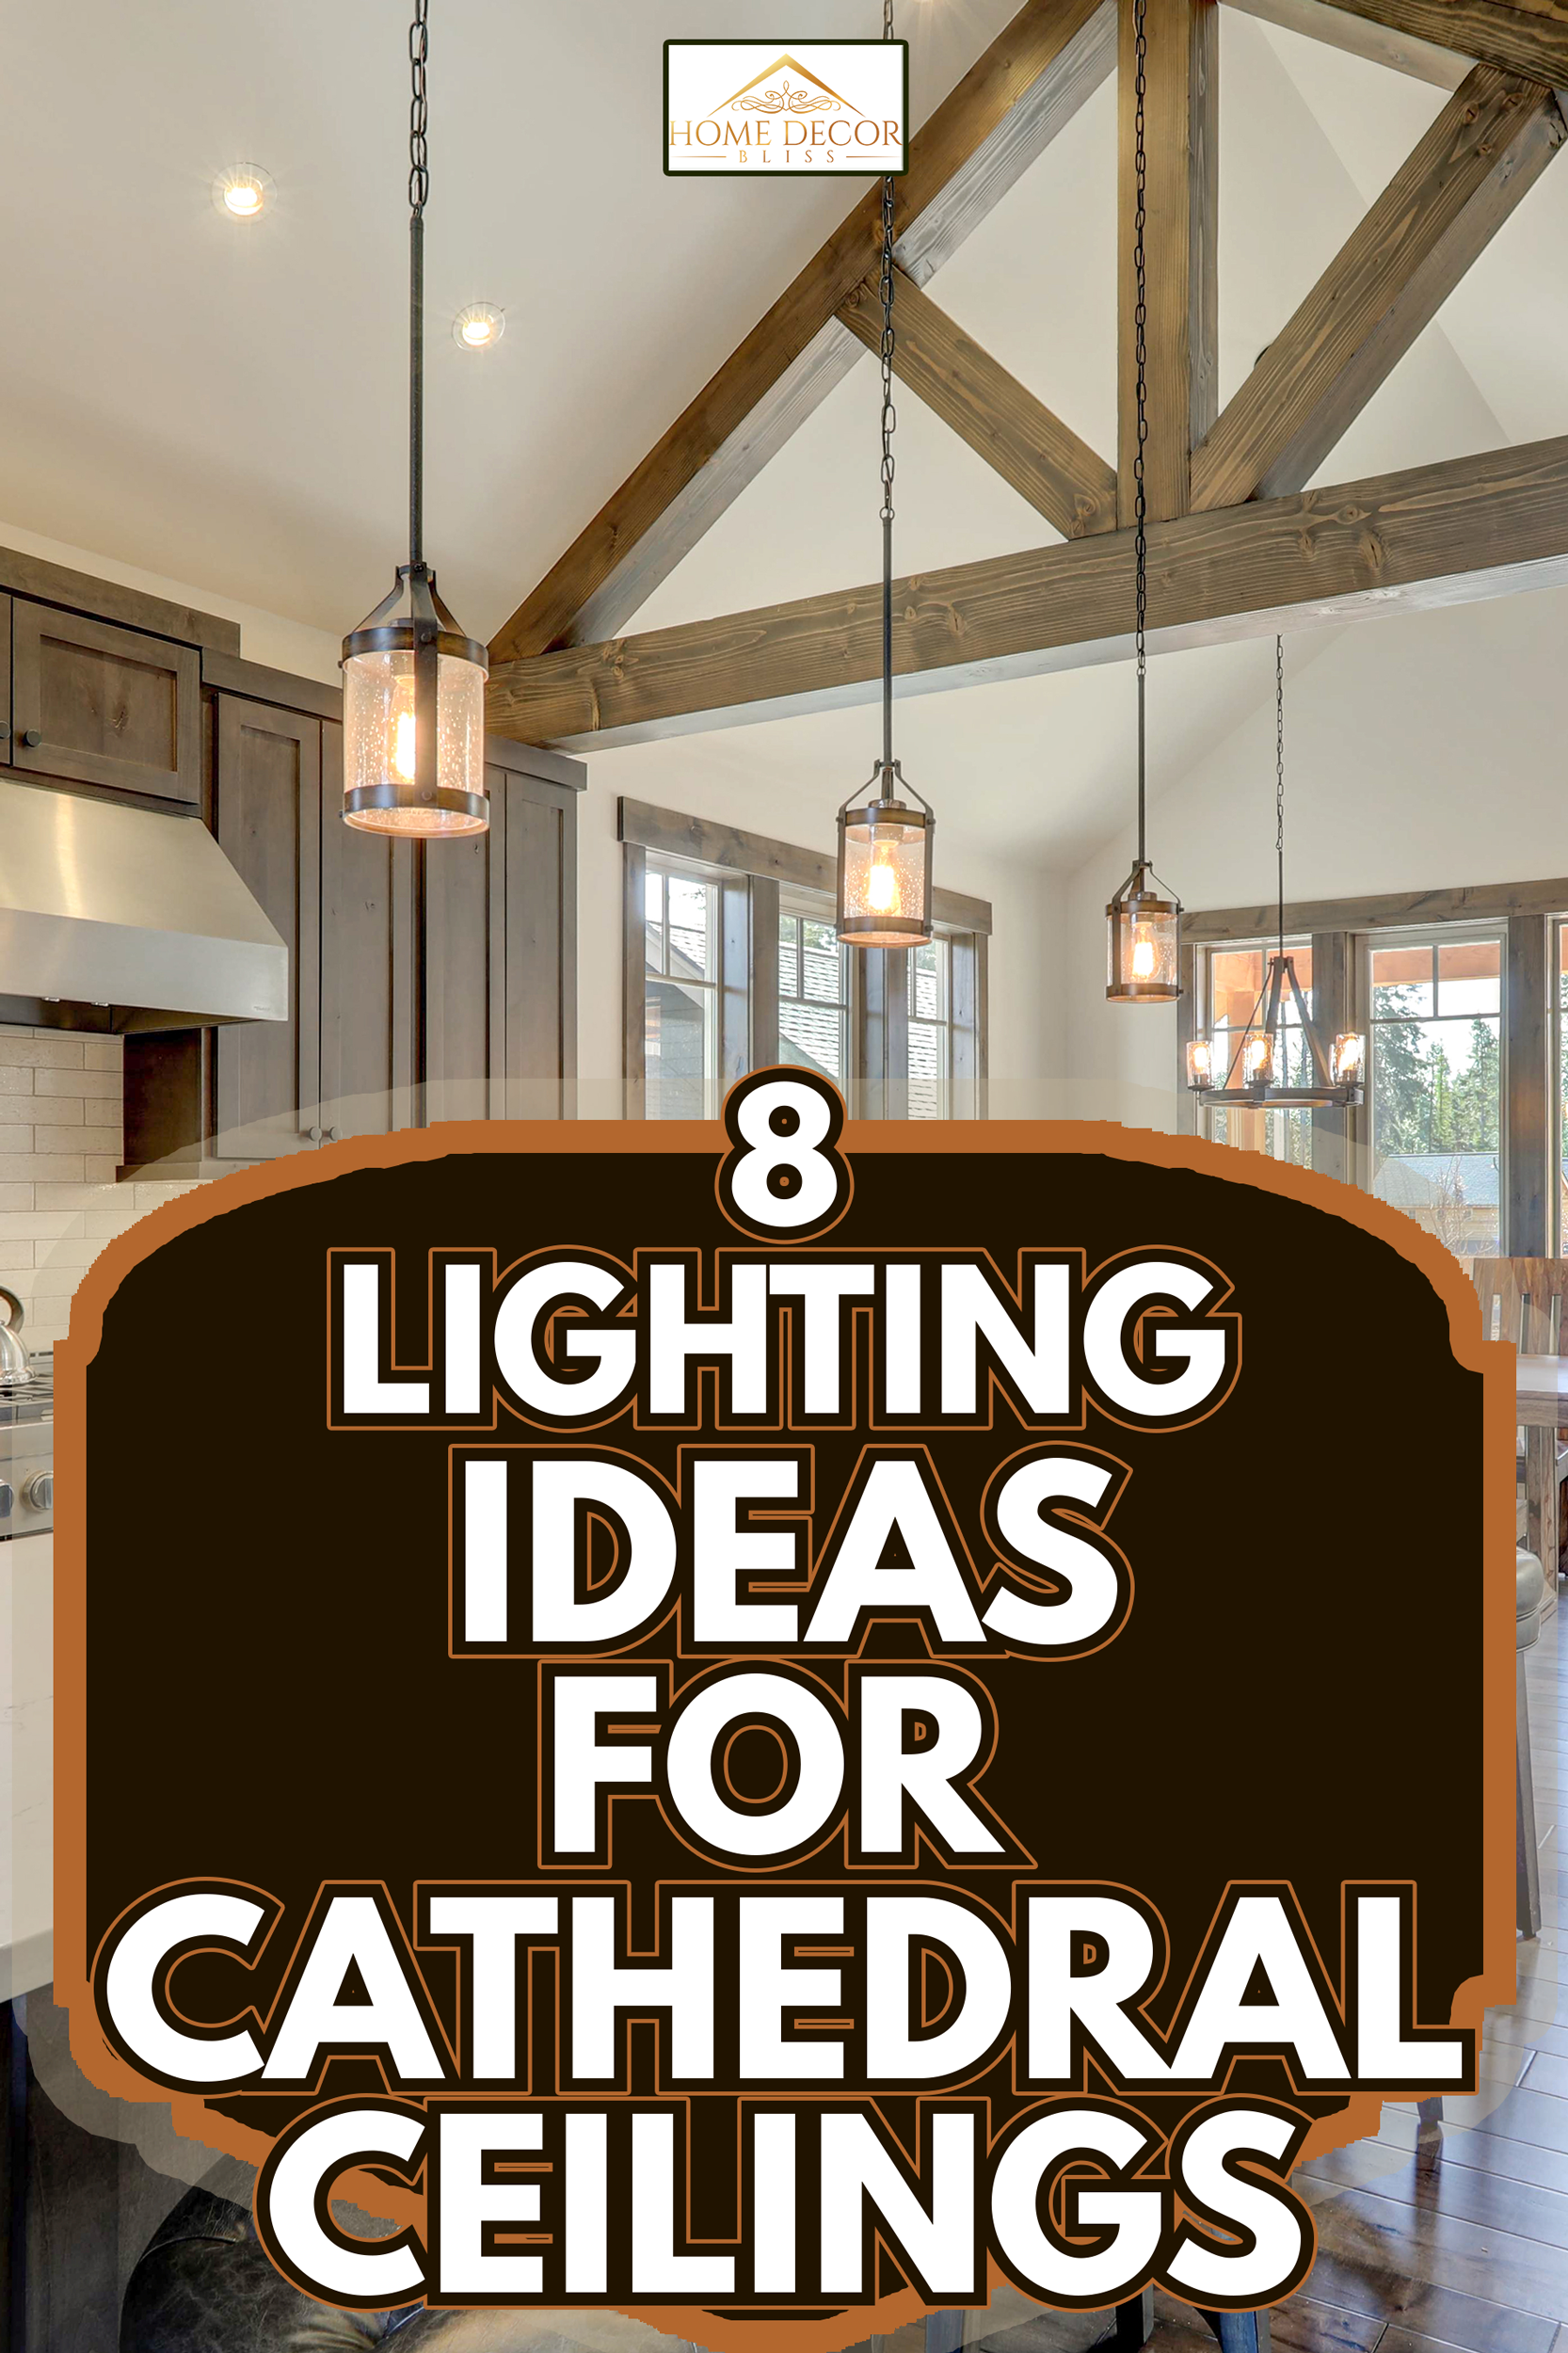 Amazing modern and rustic luxury kitchen with vaulted ceiling and wooden beams, long island with white quarts countertop and dark wood cabinets - 8 Lighting Ideas For Cathedral Ceilings